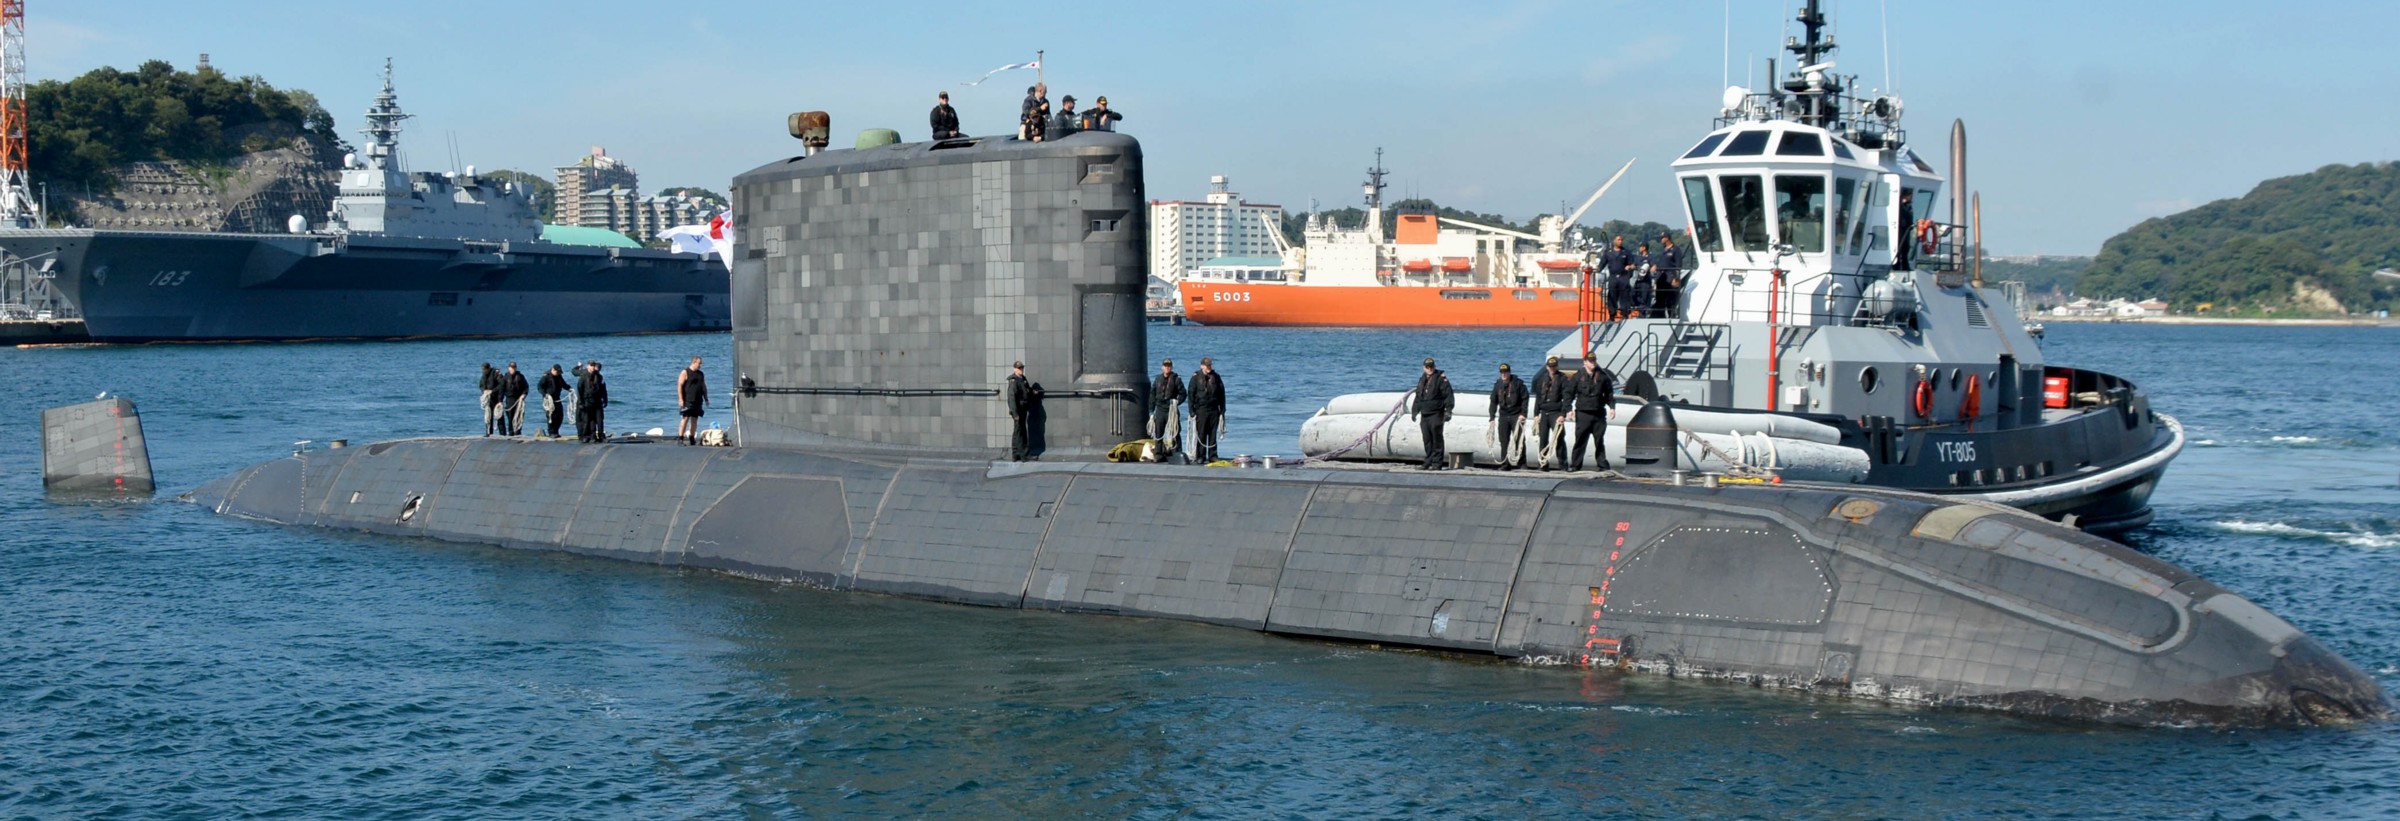 ssk-879 hmcs chicoutimi victoria upholder class patrol submarine ncsm royal canadian navy 15